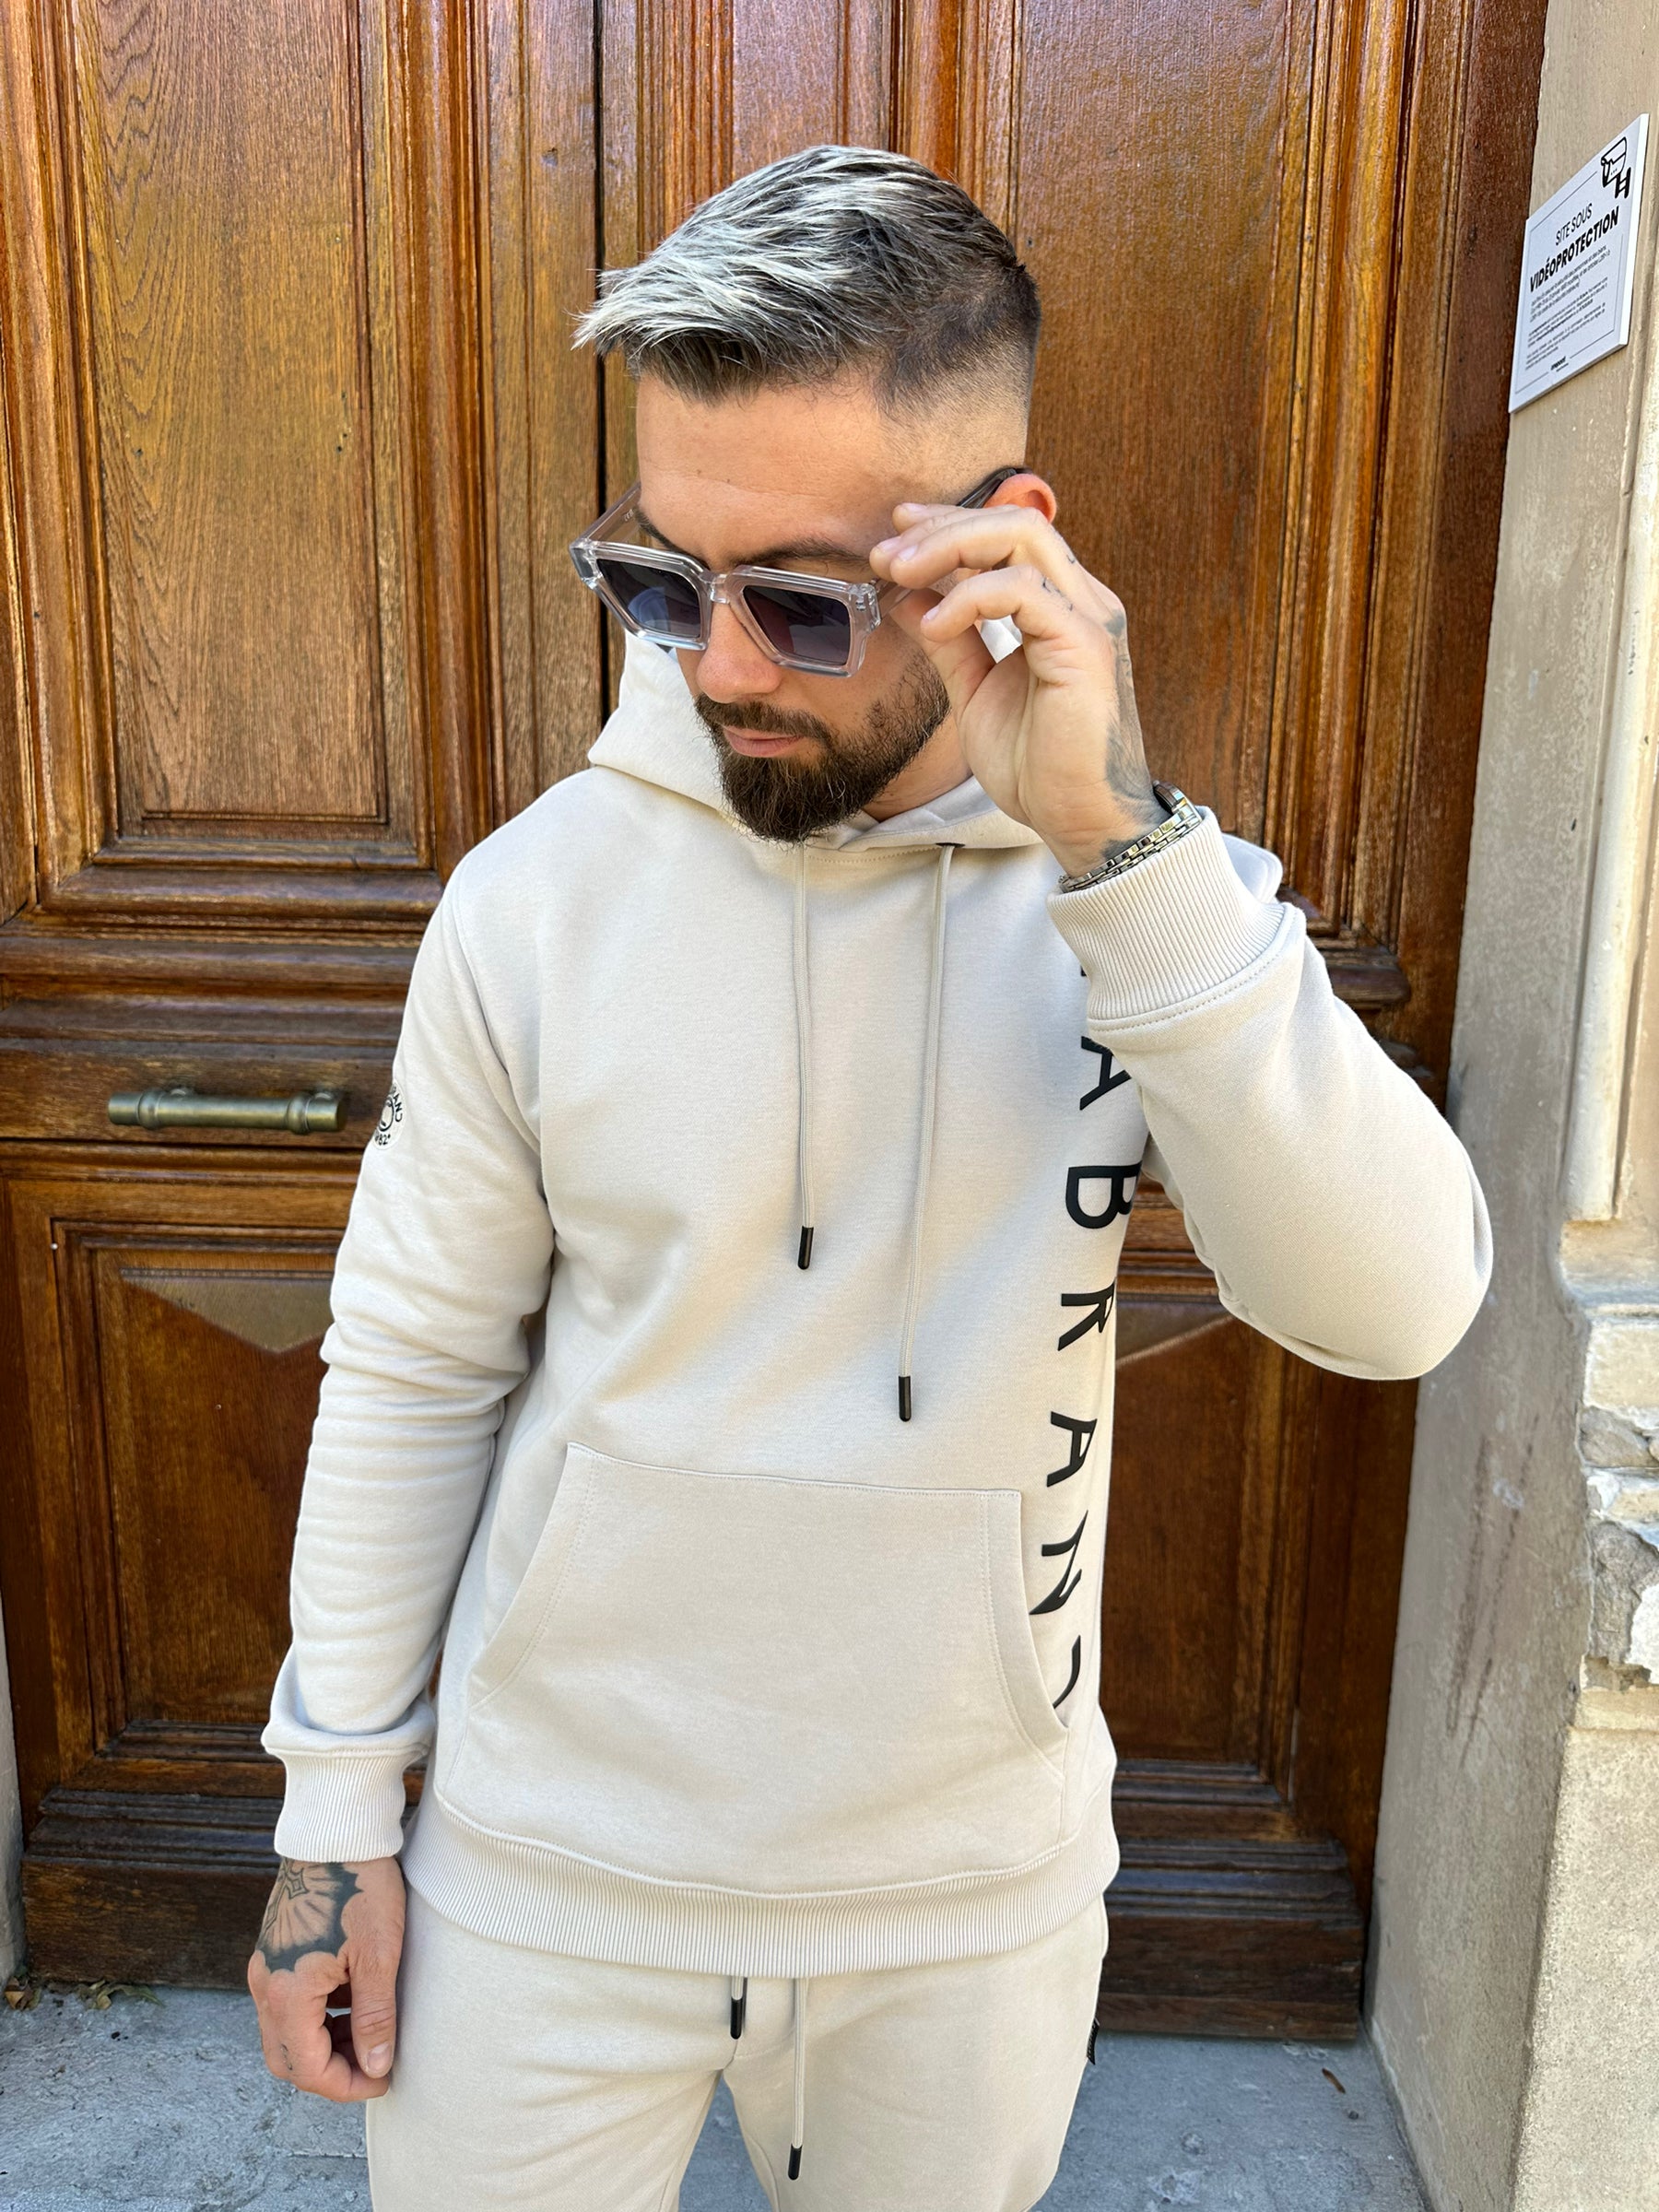 CHABRAND - Greige hooded sweatshirt with black sign